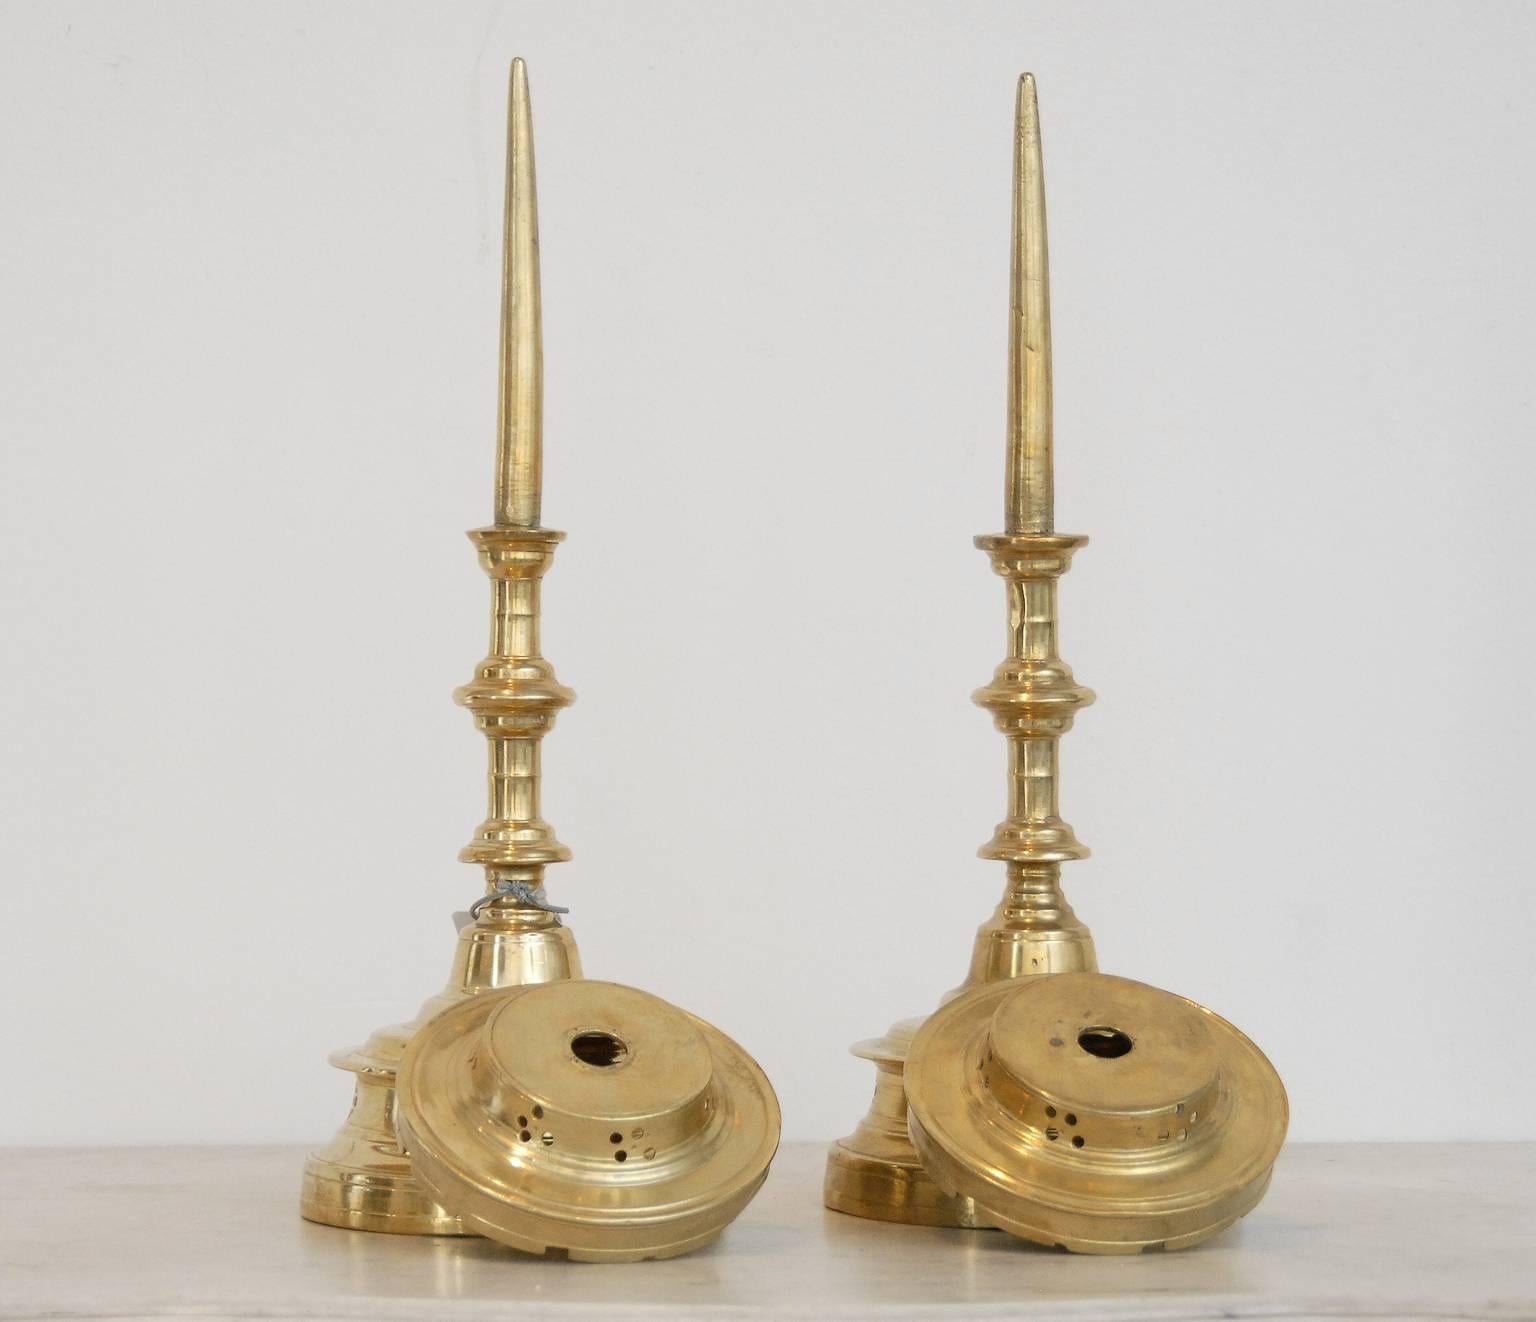 A pair of very fine Flemish pricket brass candlesticks, from the 15th century.